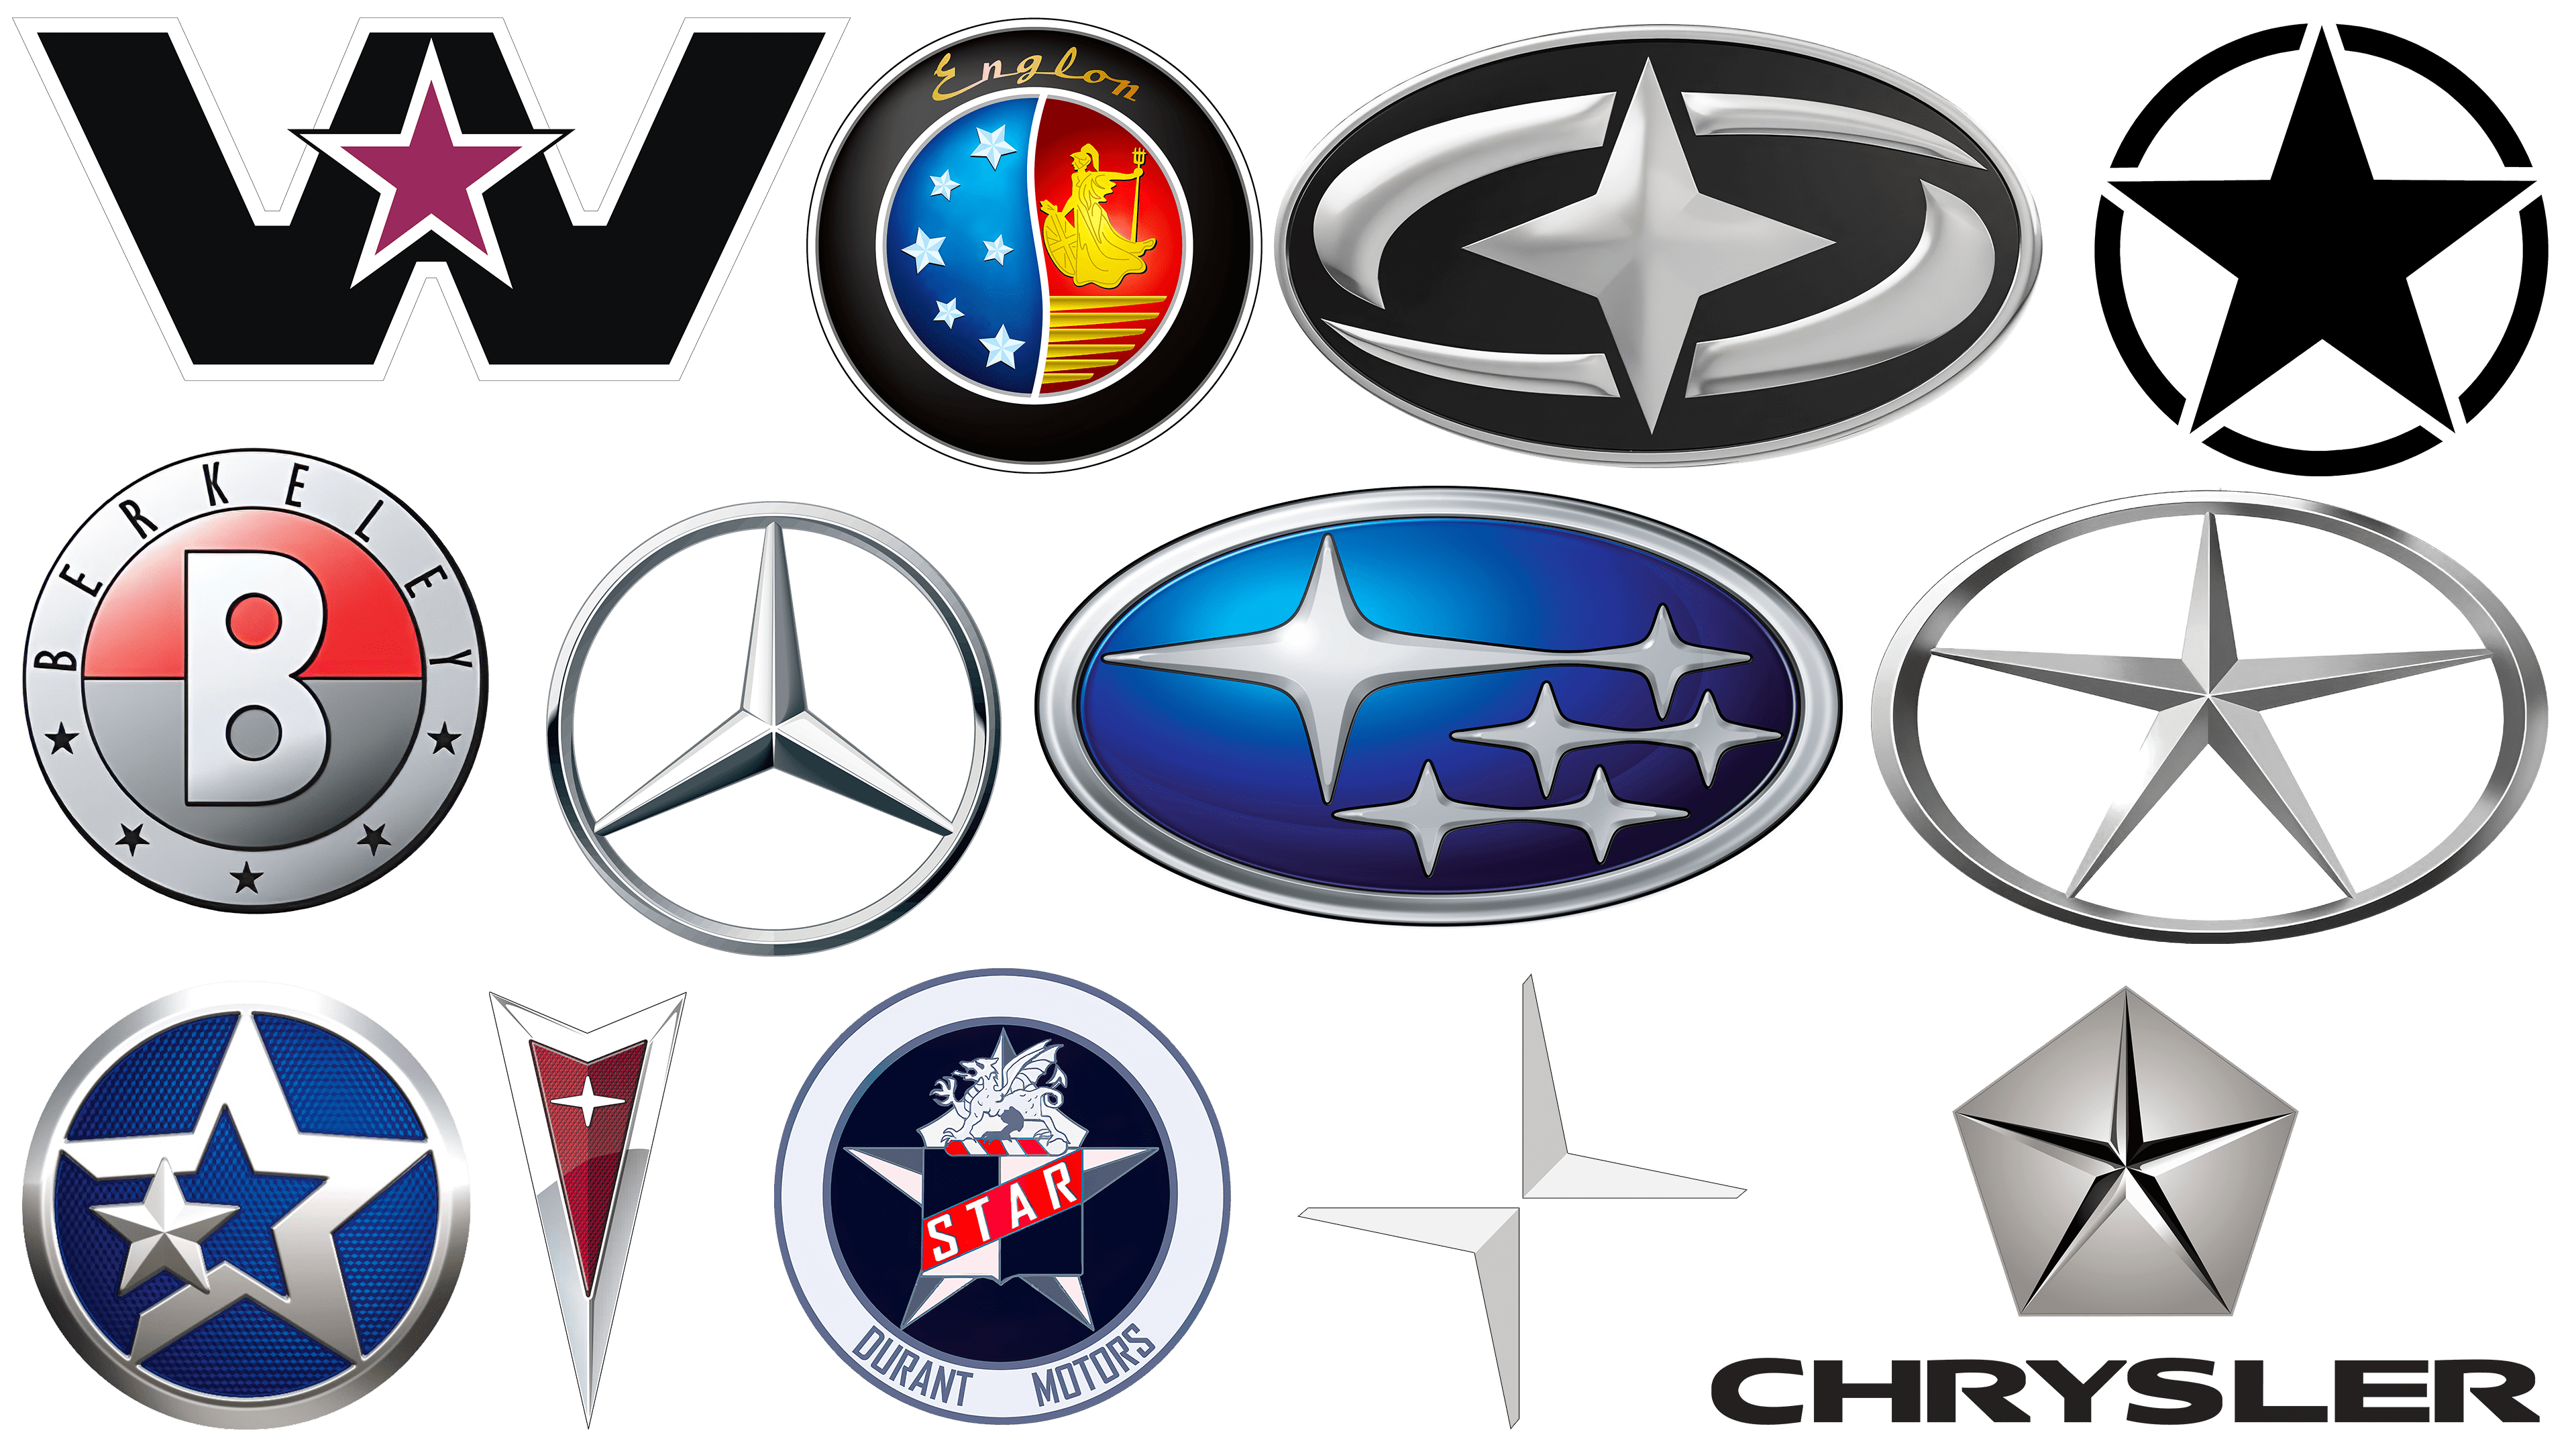 All Car Logos With Stars